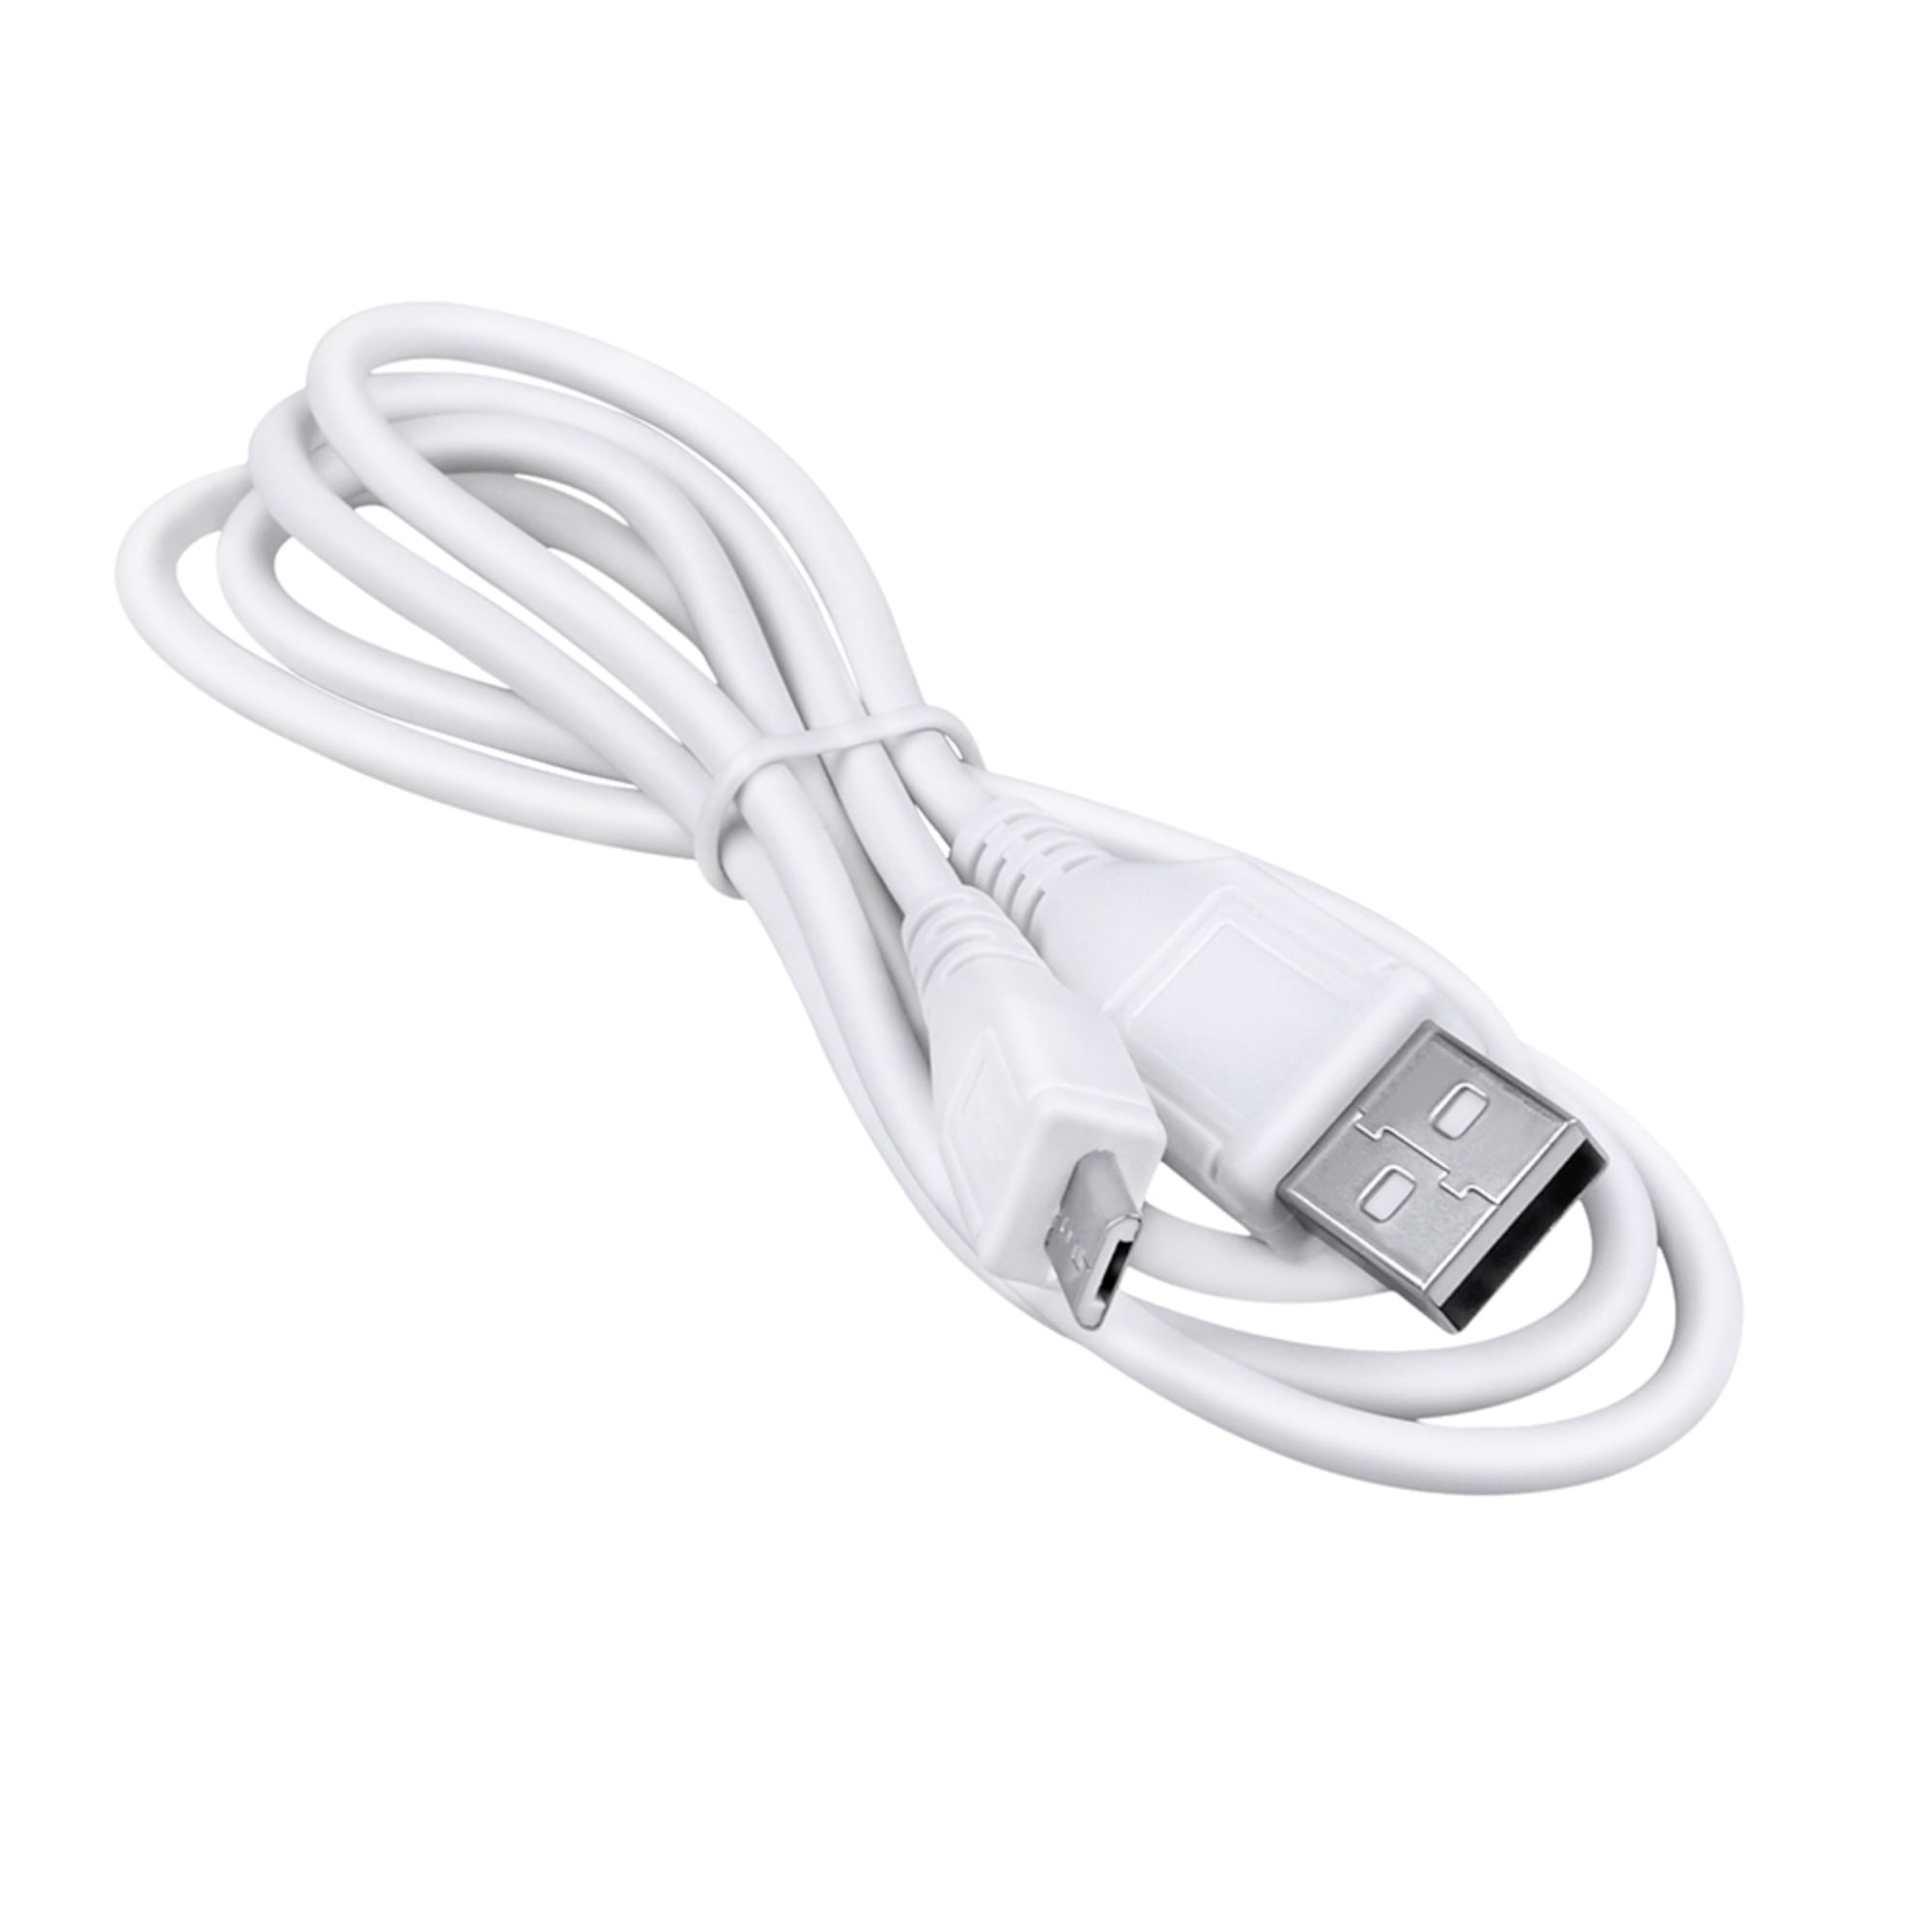 PKPOWER 3.3ft White Micro USB for Logitech Harmony 600 650 Remote Control Laptop Power Charger - Walmart.com